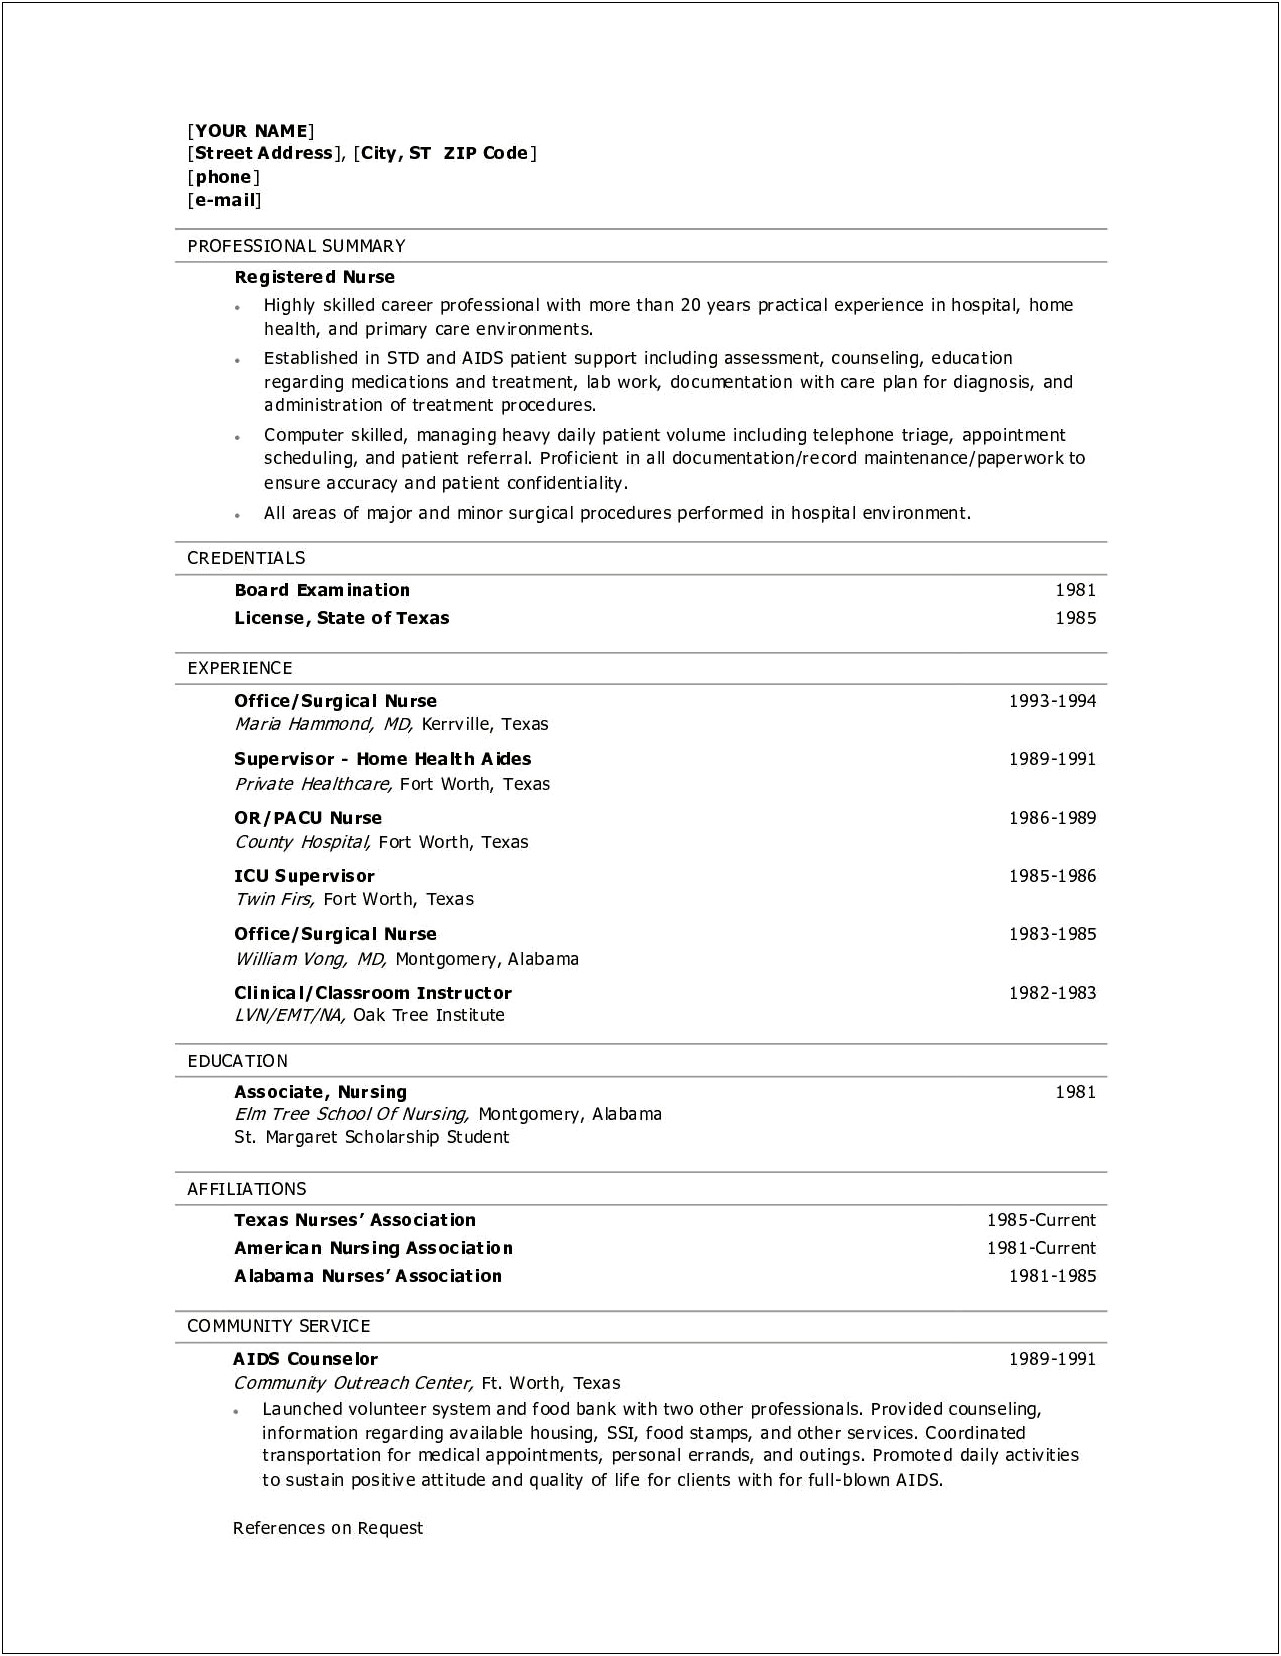 Example Of Resume For Nurses In The Philippines